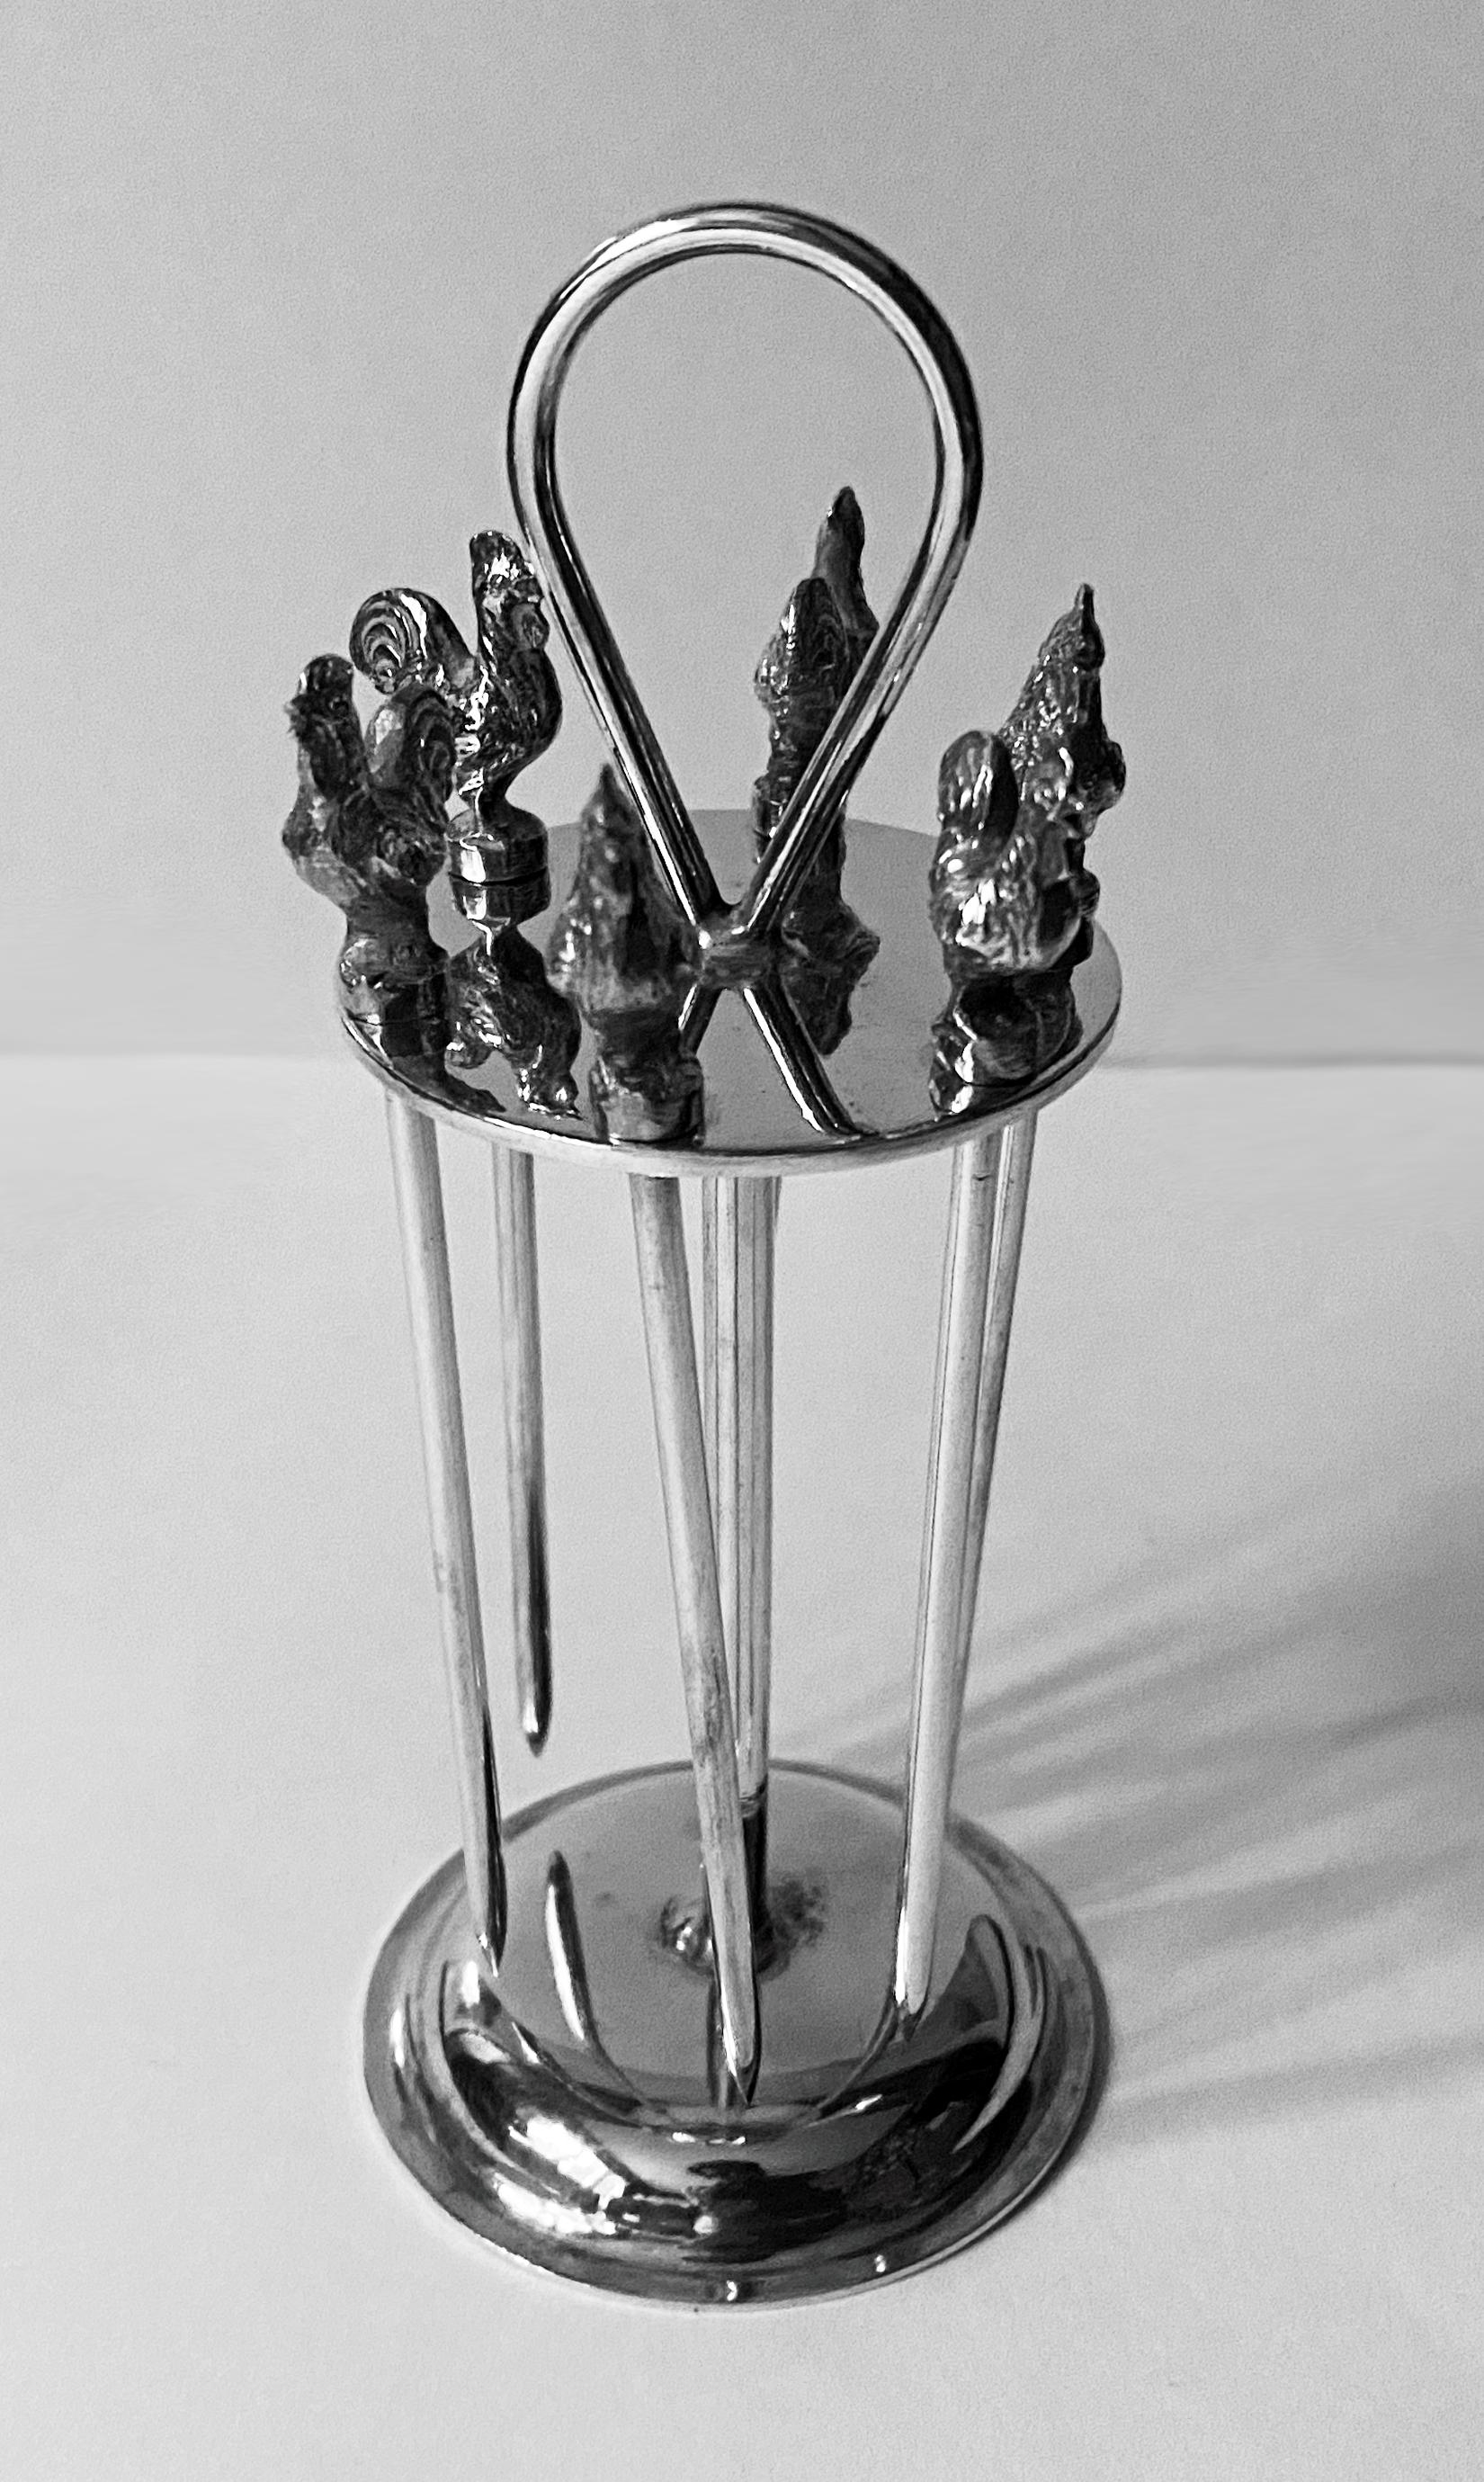 Art Deco Hukin and Heath silver plate cocktail set, circa 1930. Upright form with holders for six rooster head cocktail sticks. Measures: Height: 5.25 inches, diameter: 2 inches.